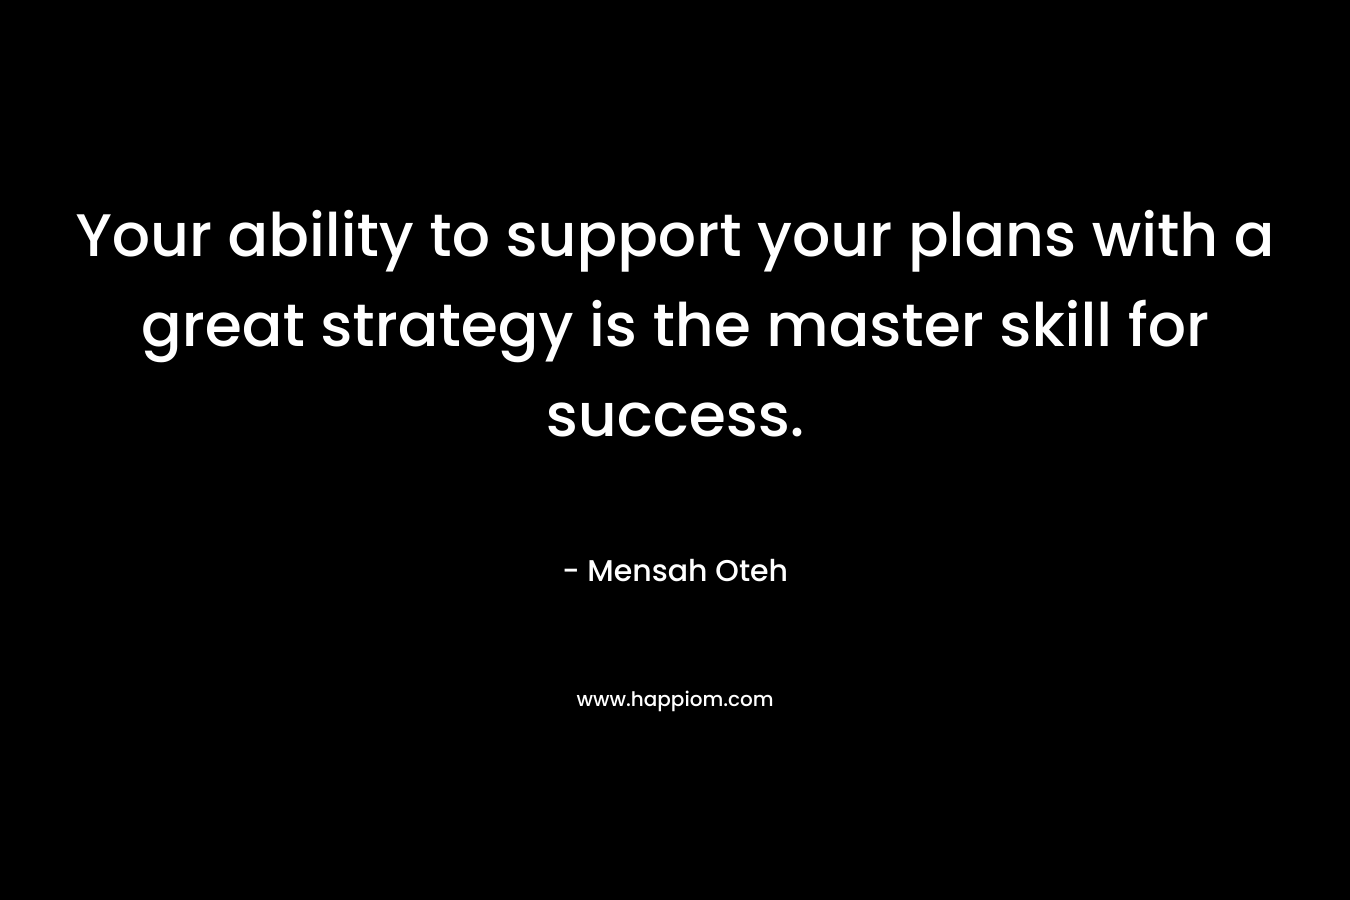 Your ability to support your plans with a great strategy is the master skill for success.